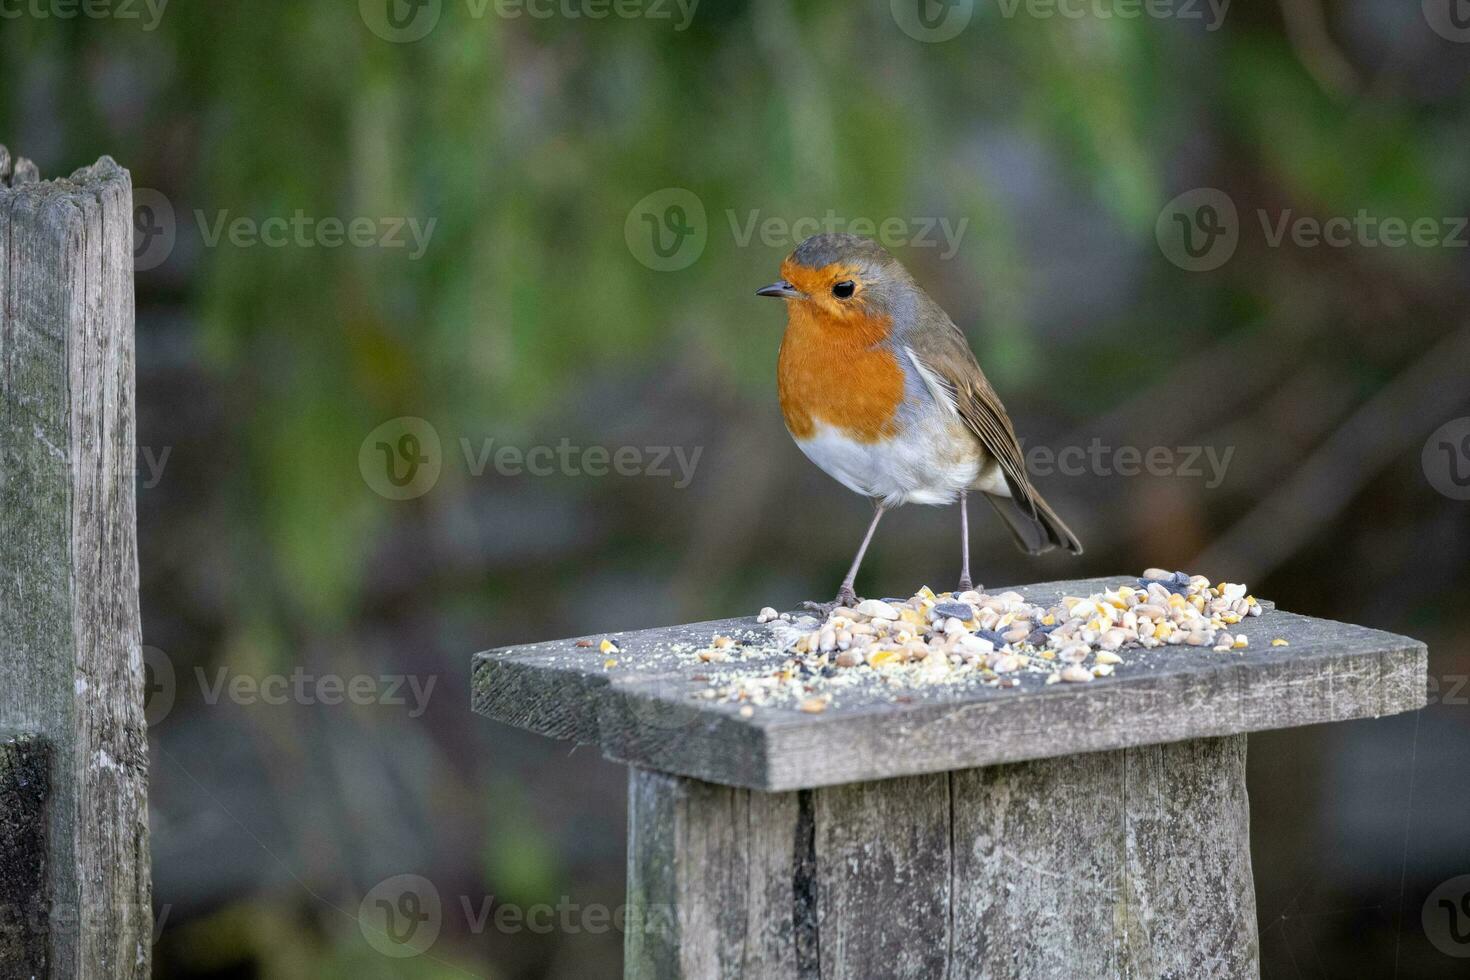 Close-up of an alert Robin standing on a wooden table covered with seed photo